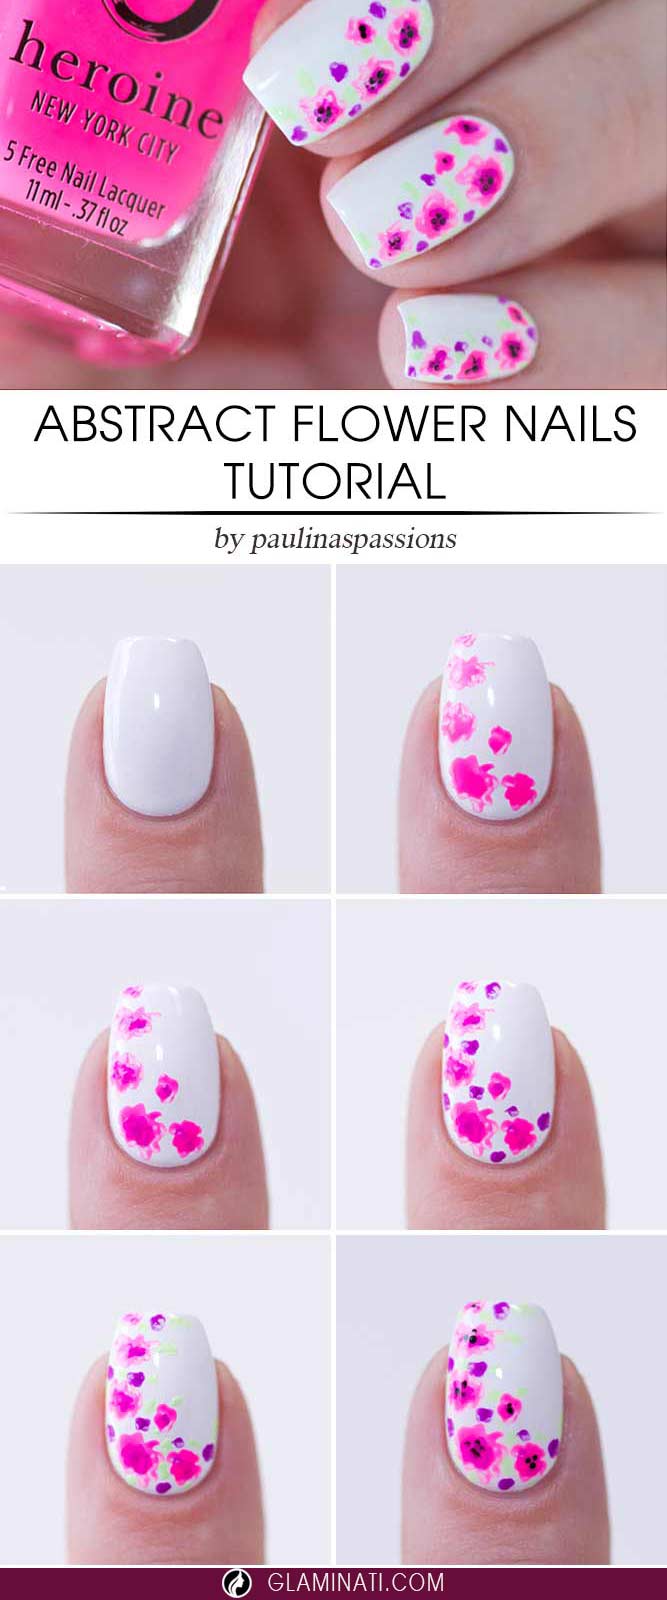 Abstract Flower Nails